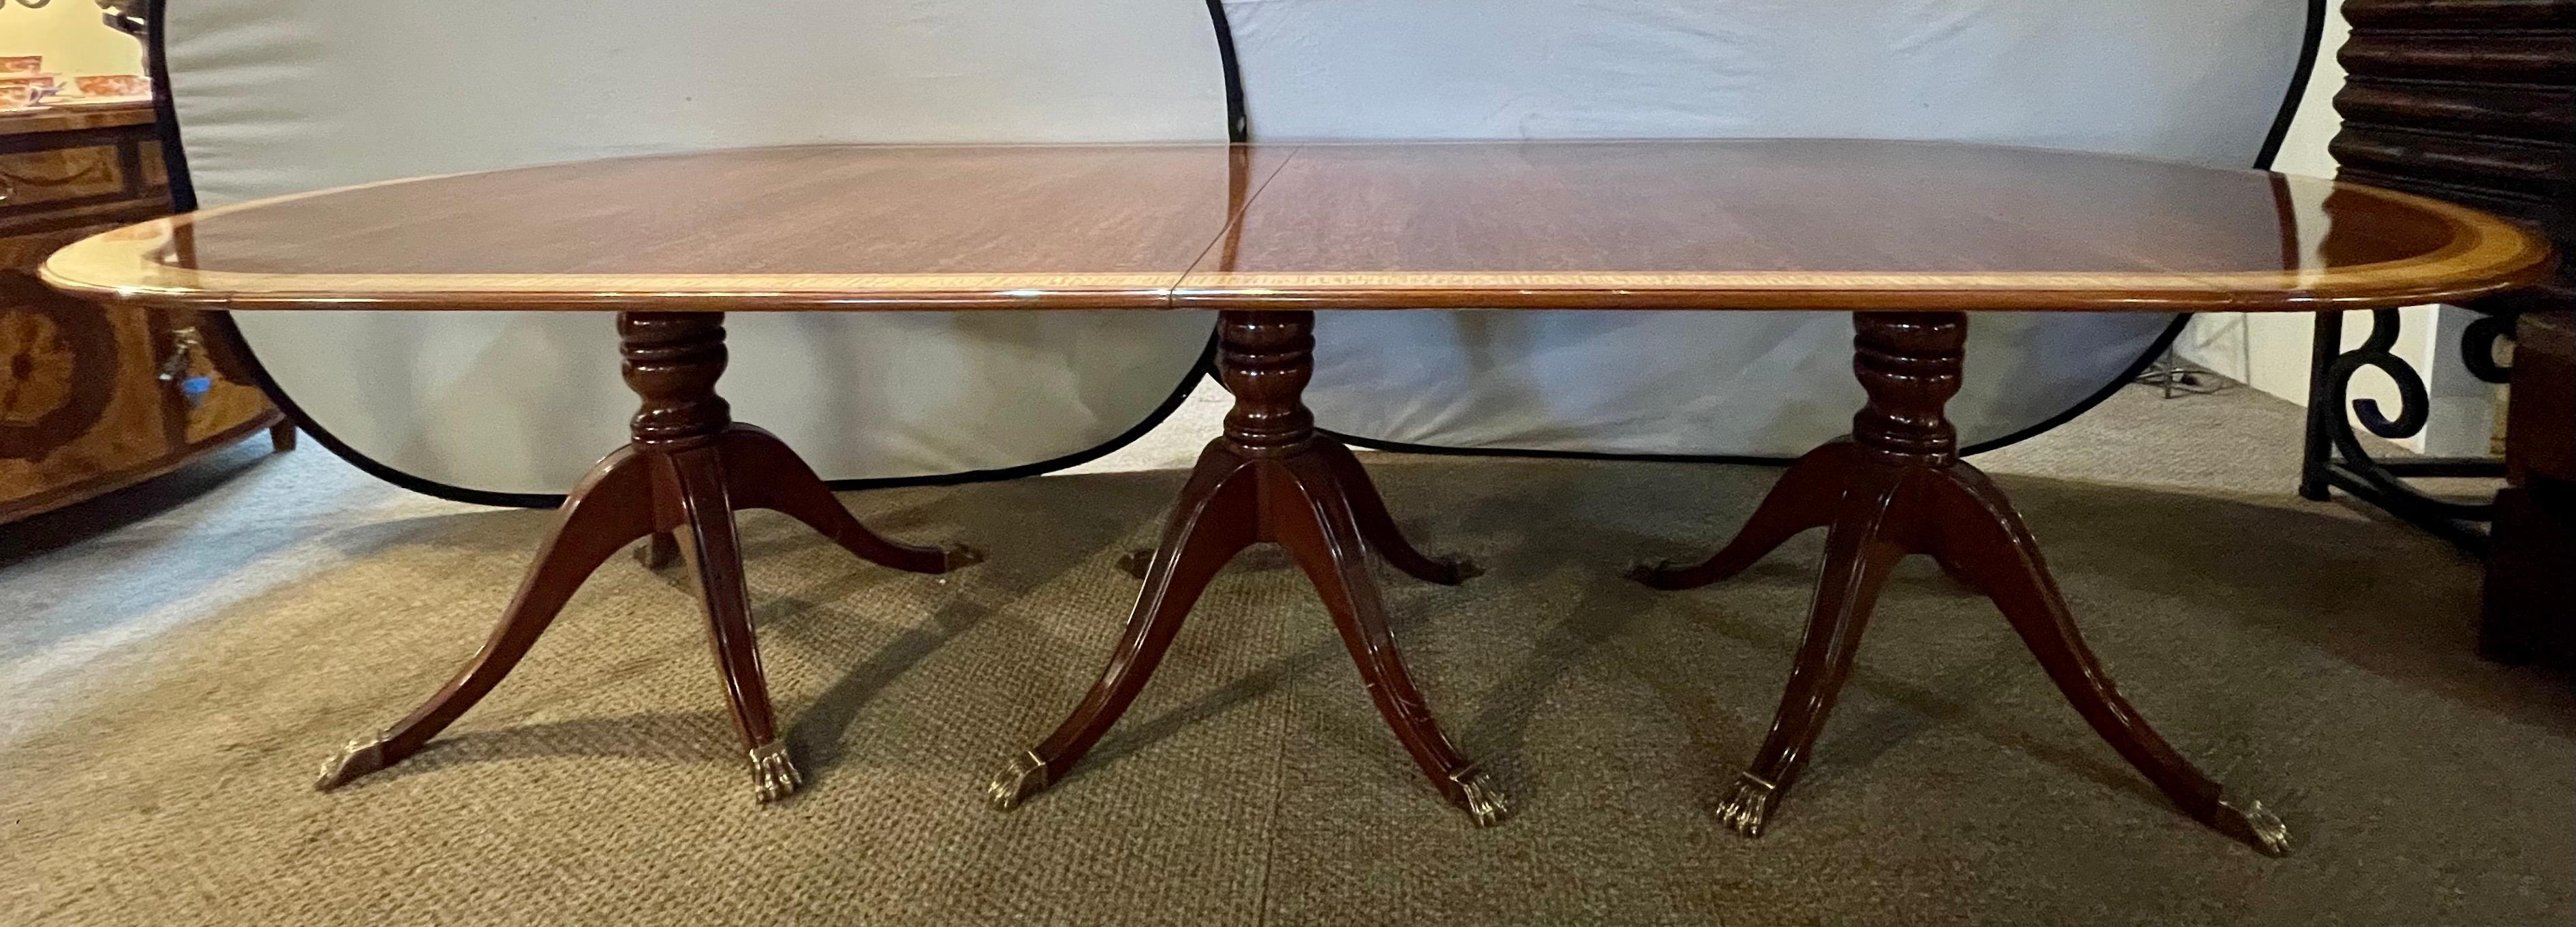 Regency Style Triple Pedestal Dining Room Table Banded and Fully Refinished 5